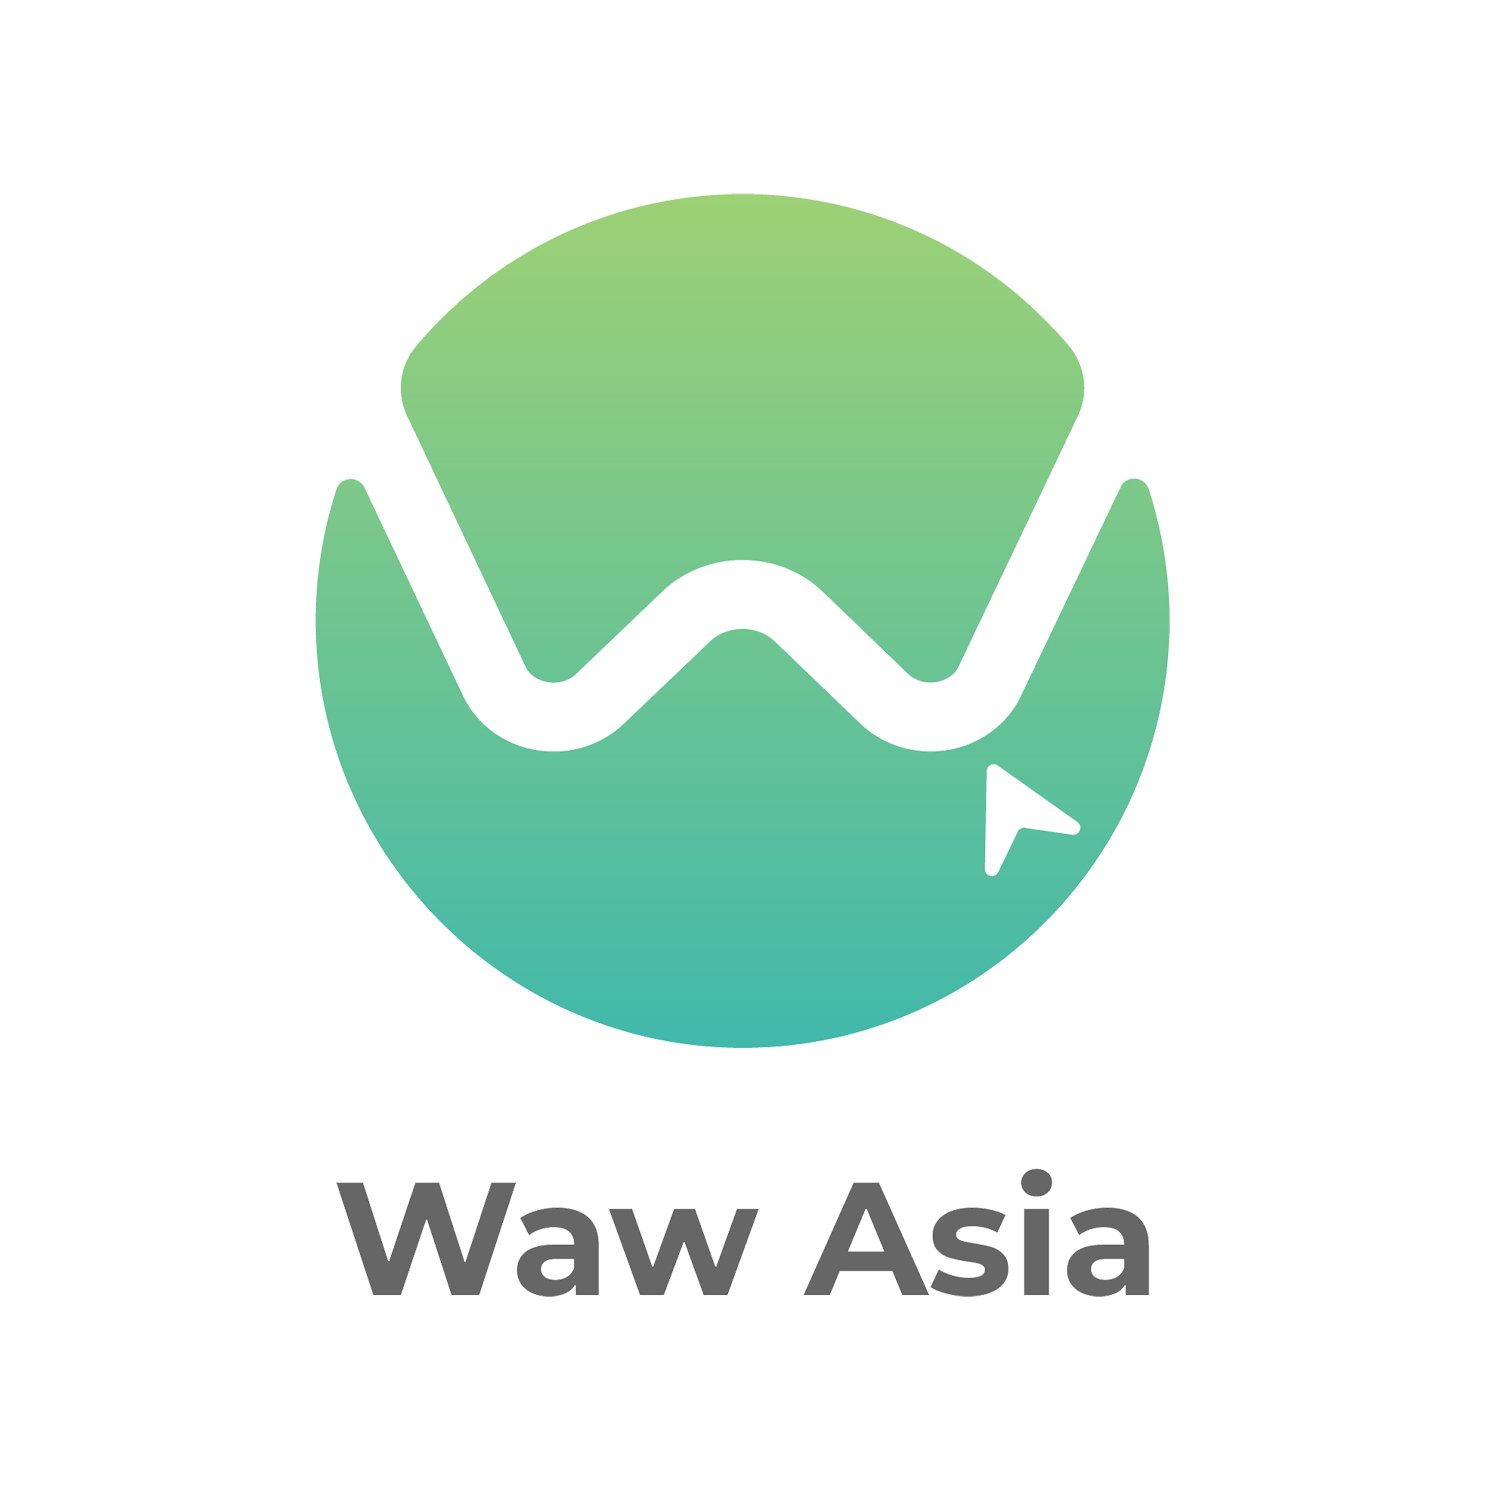 Waw Asia on Databroker